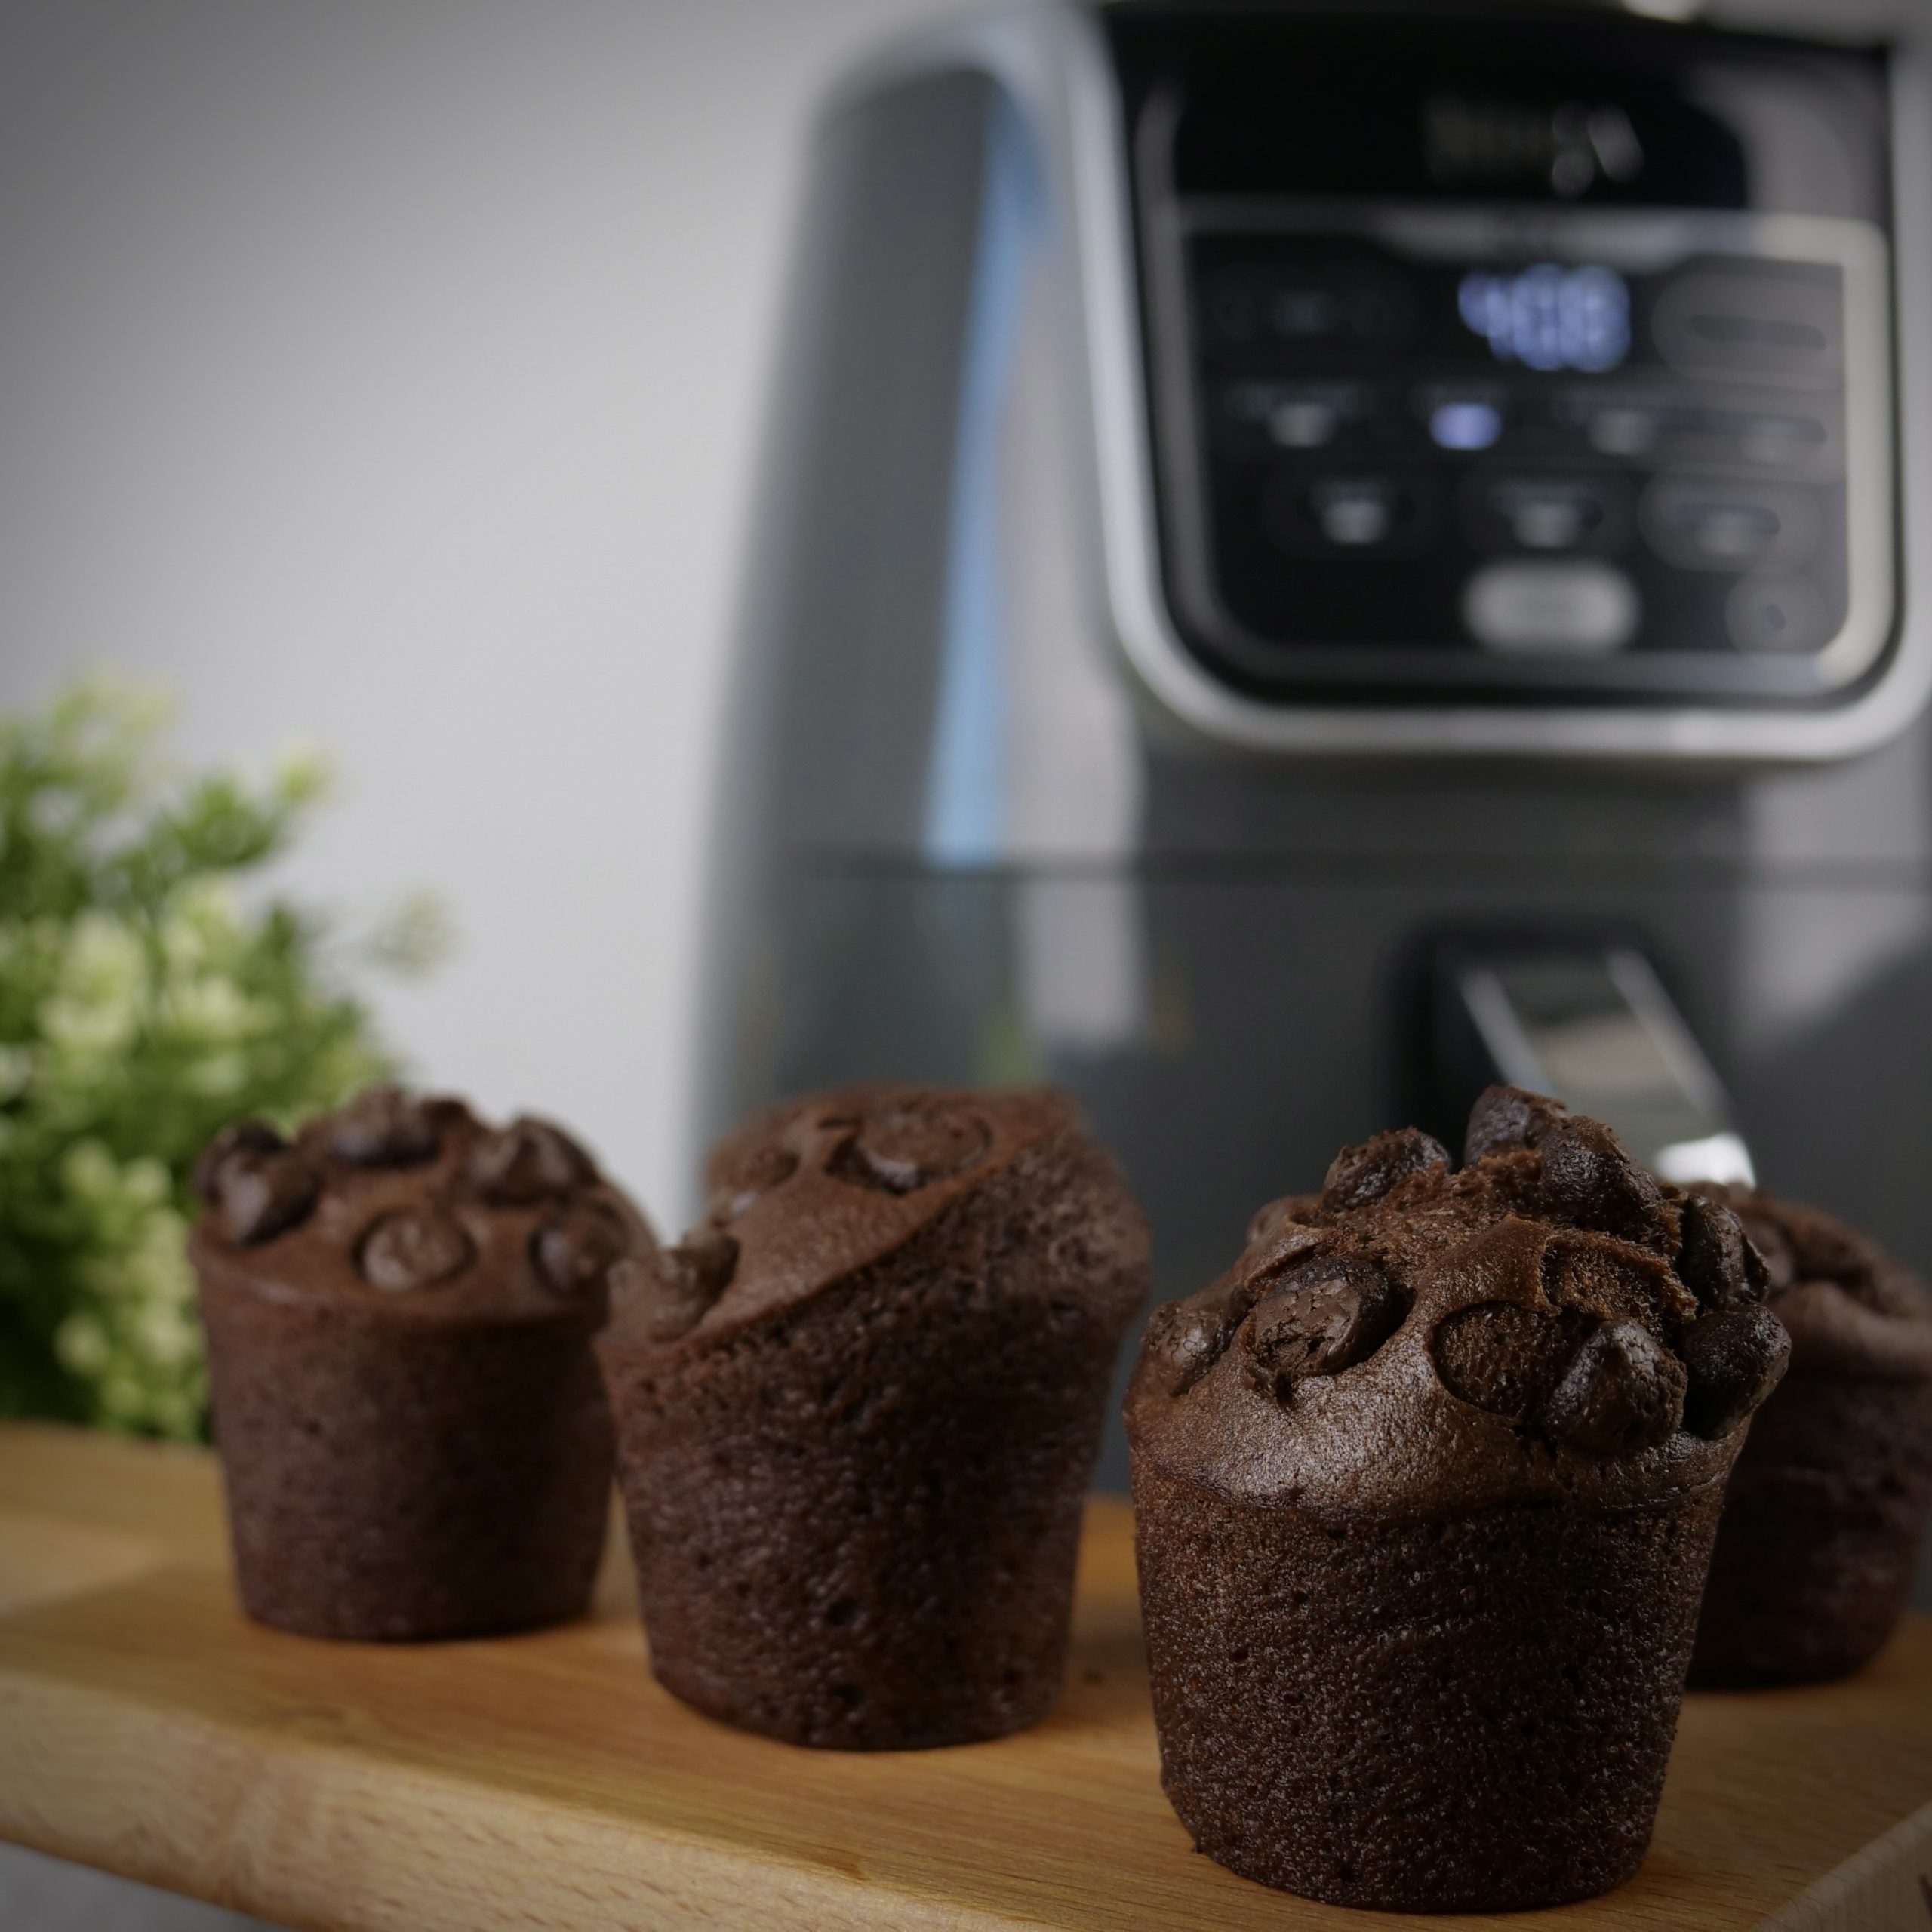 https://shirleycooking.com/wp-content/uploads/2023/10/Chocolate-cupcakes-in-air-fryer-web-scaled.jpeg